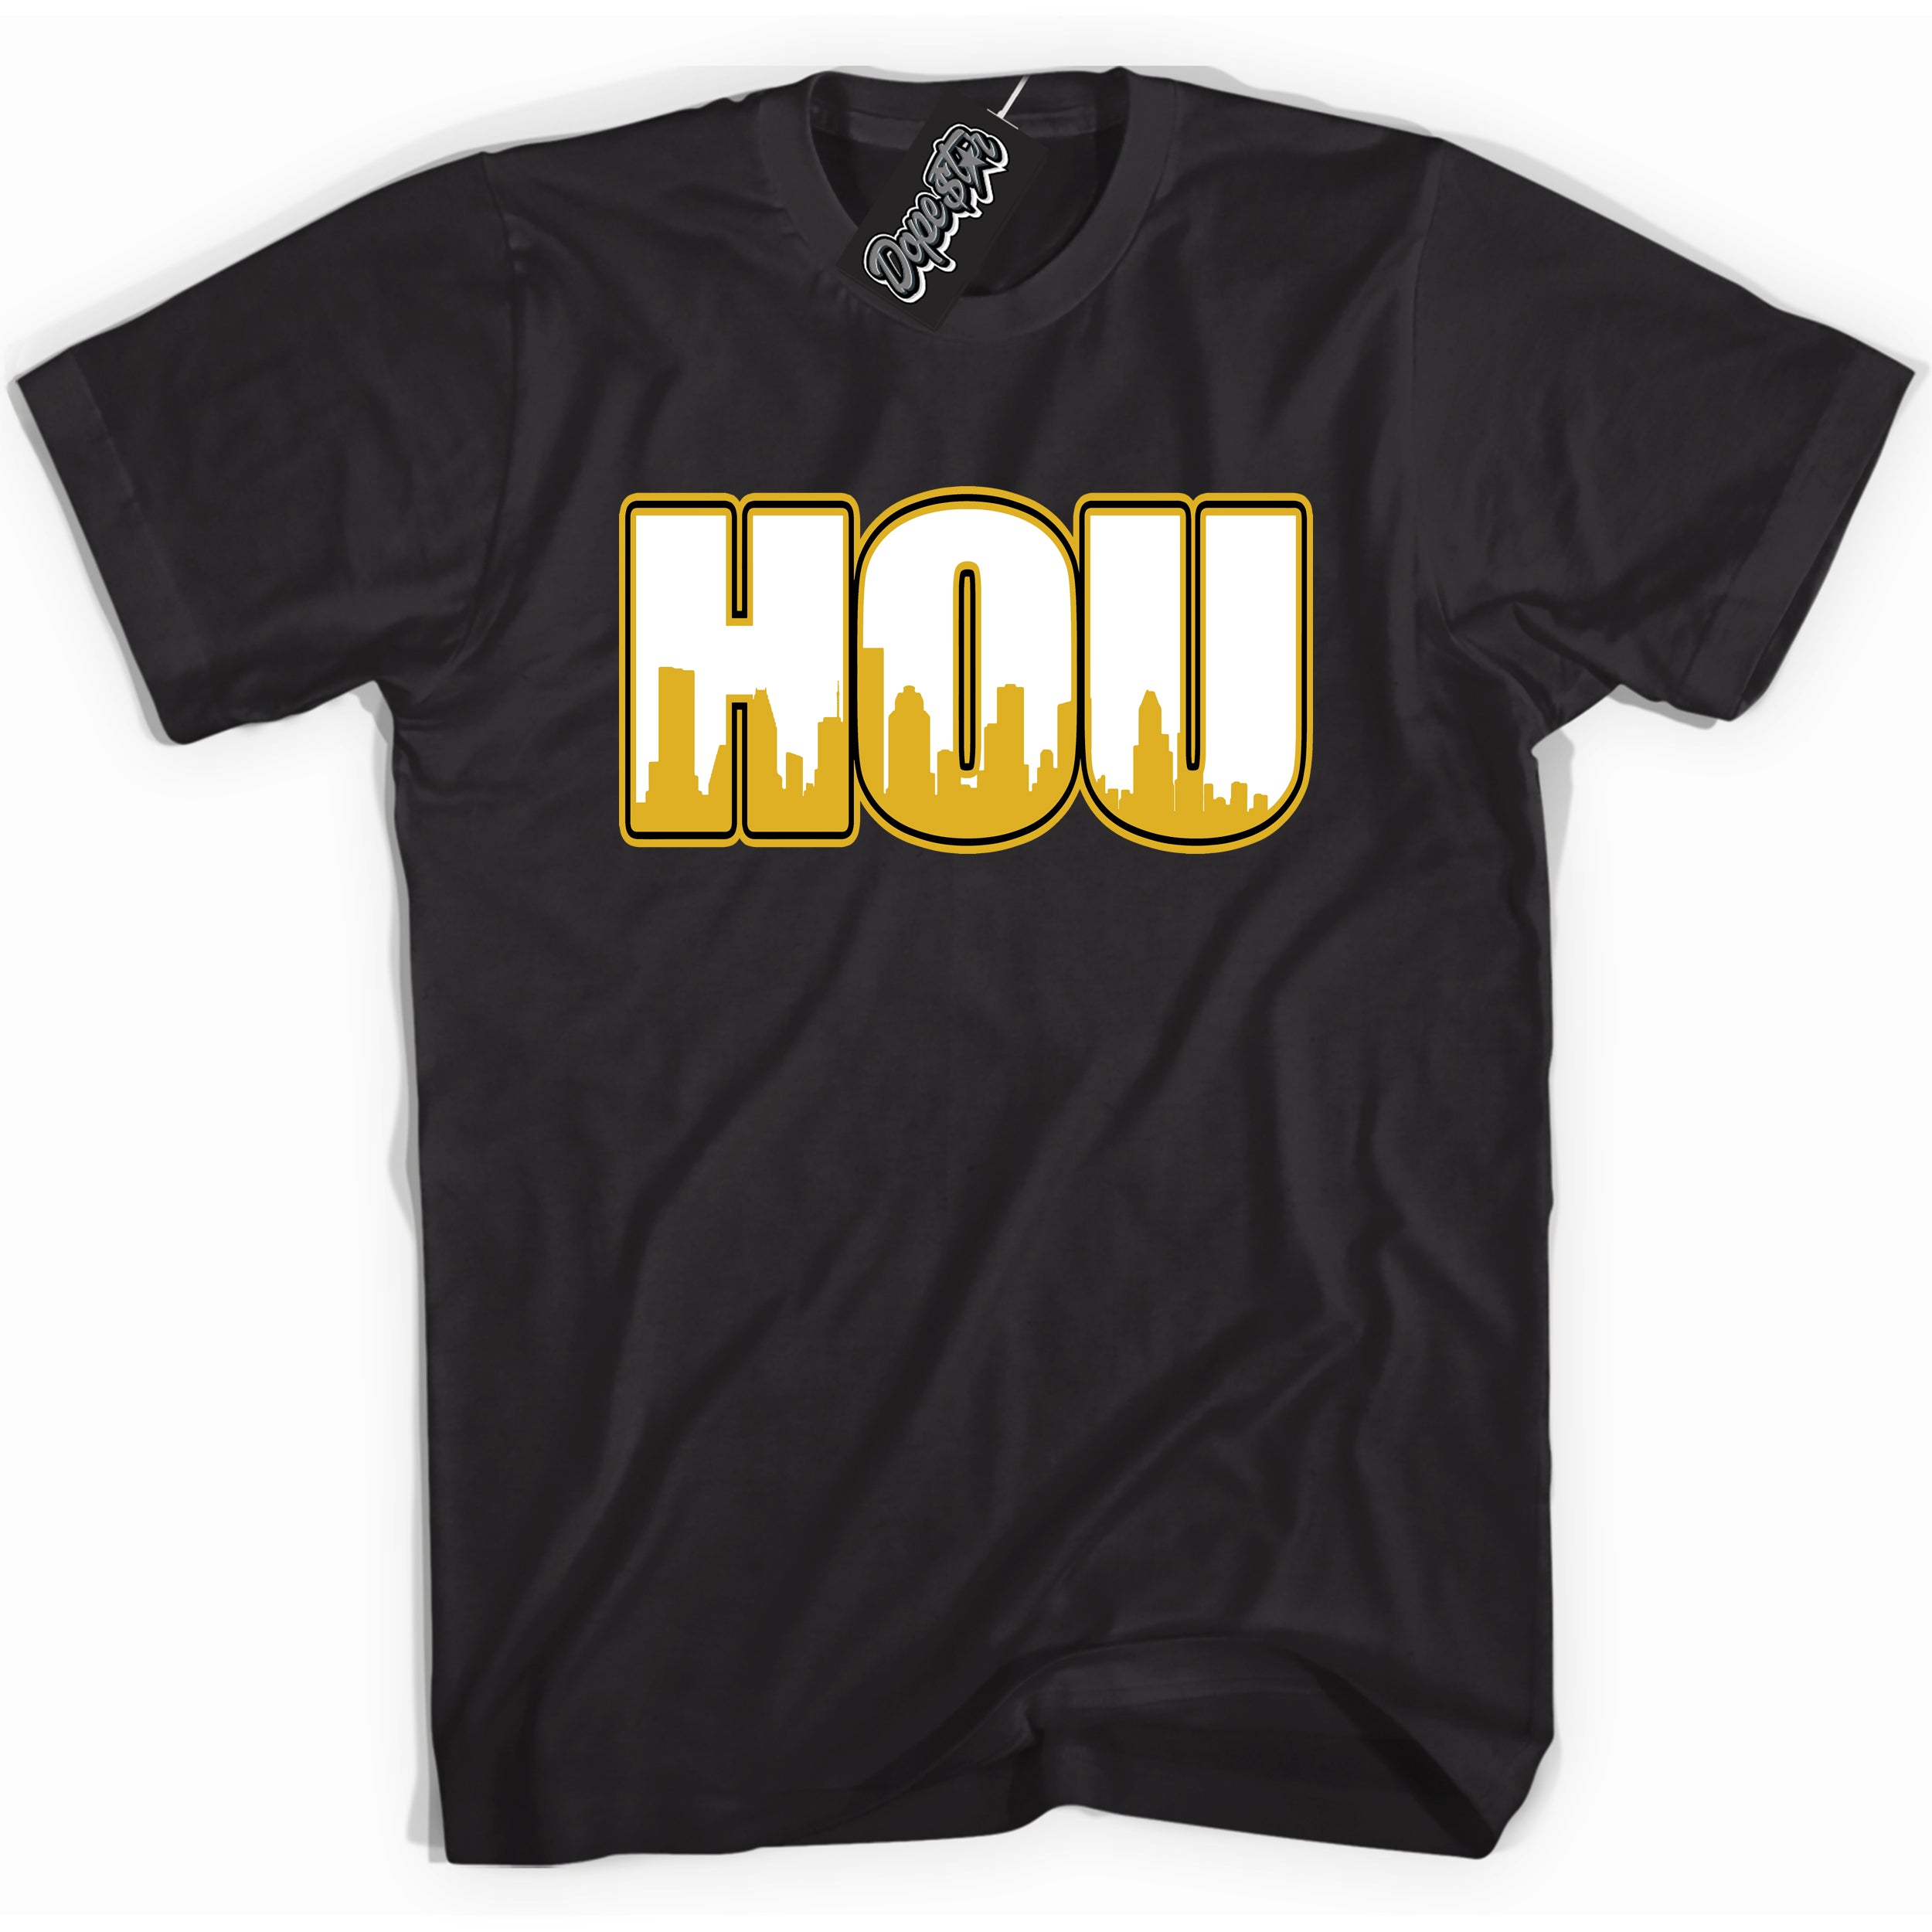 Cool Black Shirt With Houston design That Perfectly Matches AIR JORDAN 6 RETRO YELLOW OCHRE Sneakers.